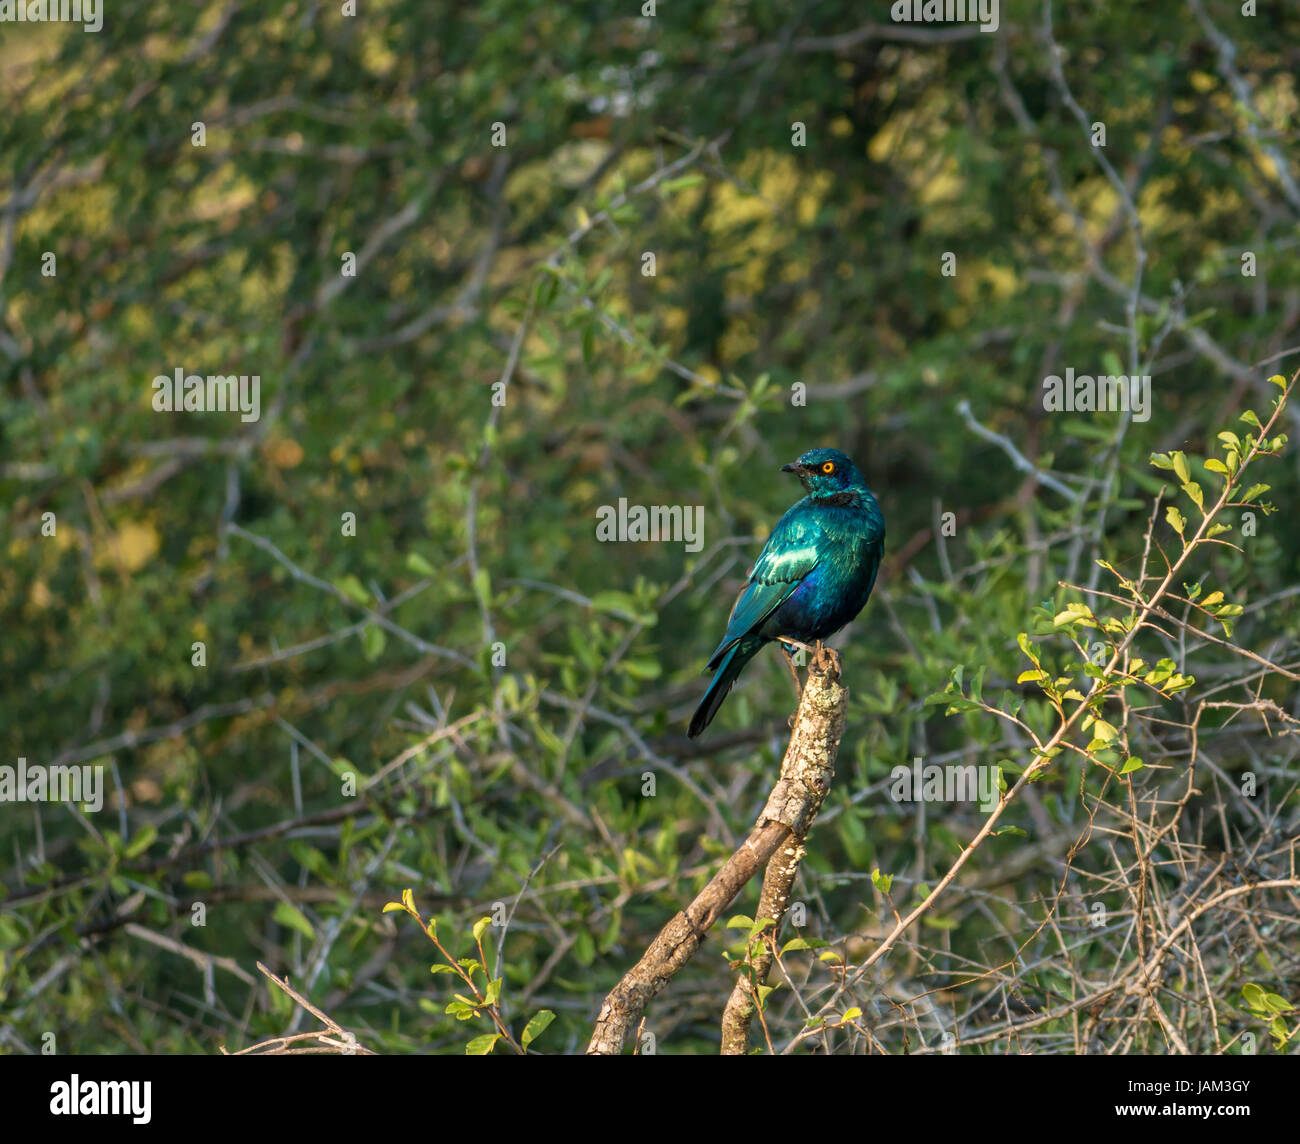 Greater blue eared starling, Lamprotornis chalybaeus, perched on branch, Greater Kruger National Park, South Africa Stock Photo